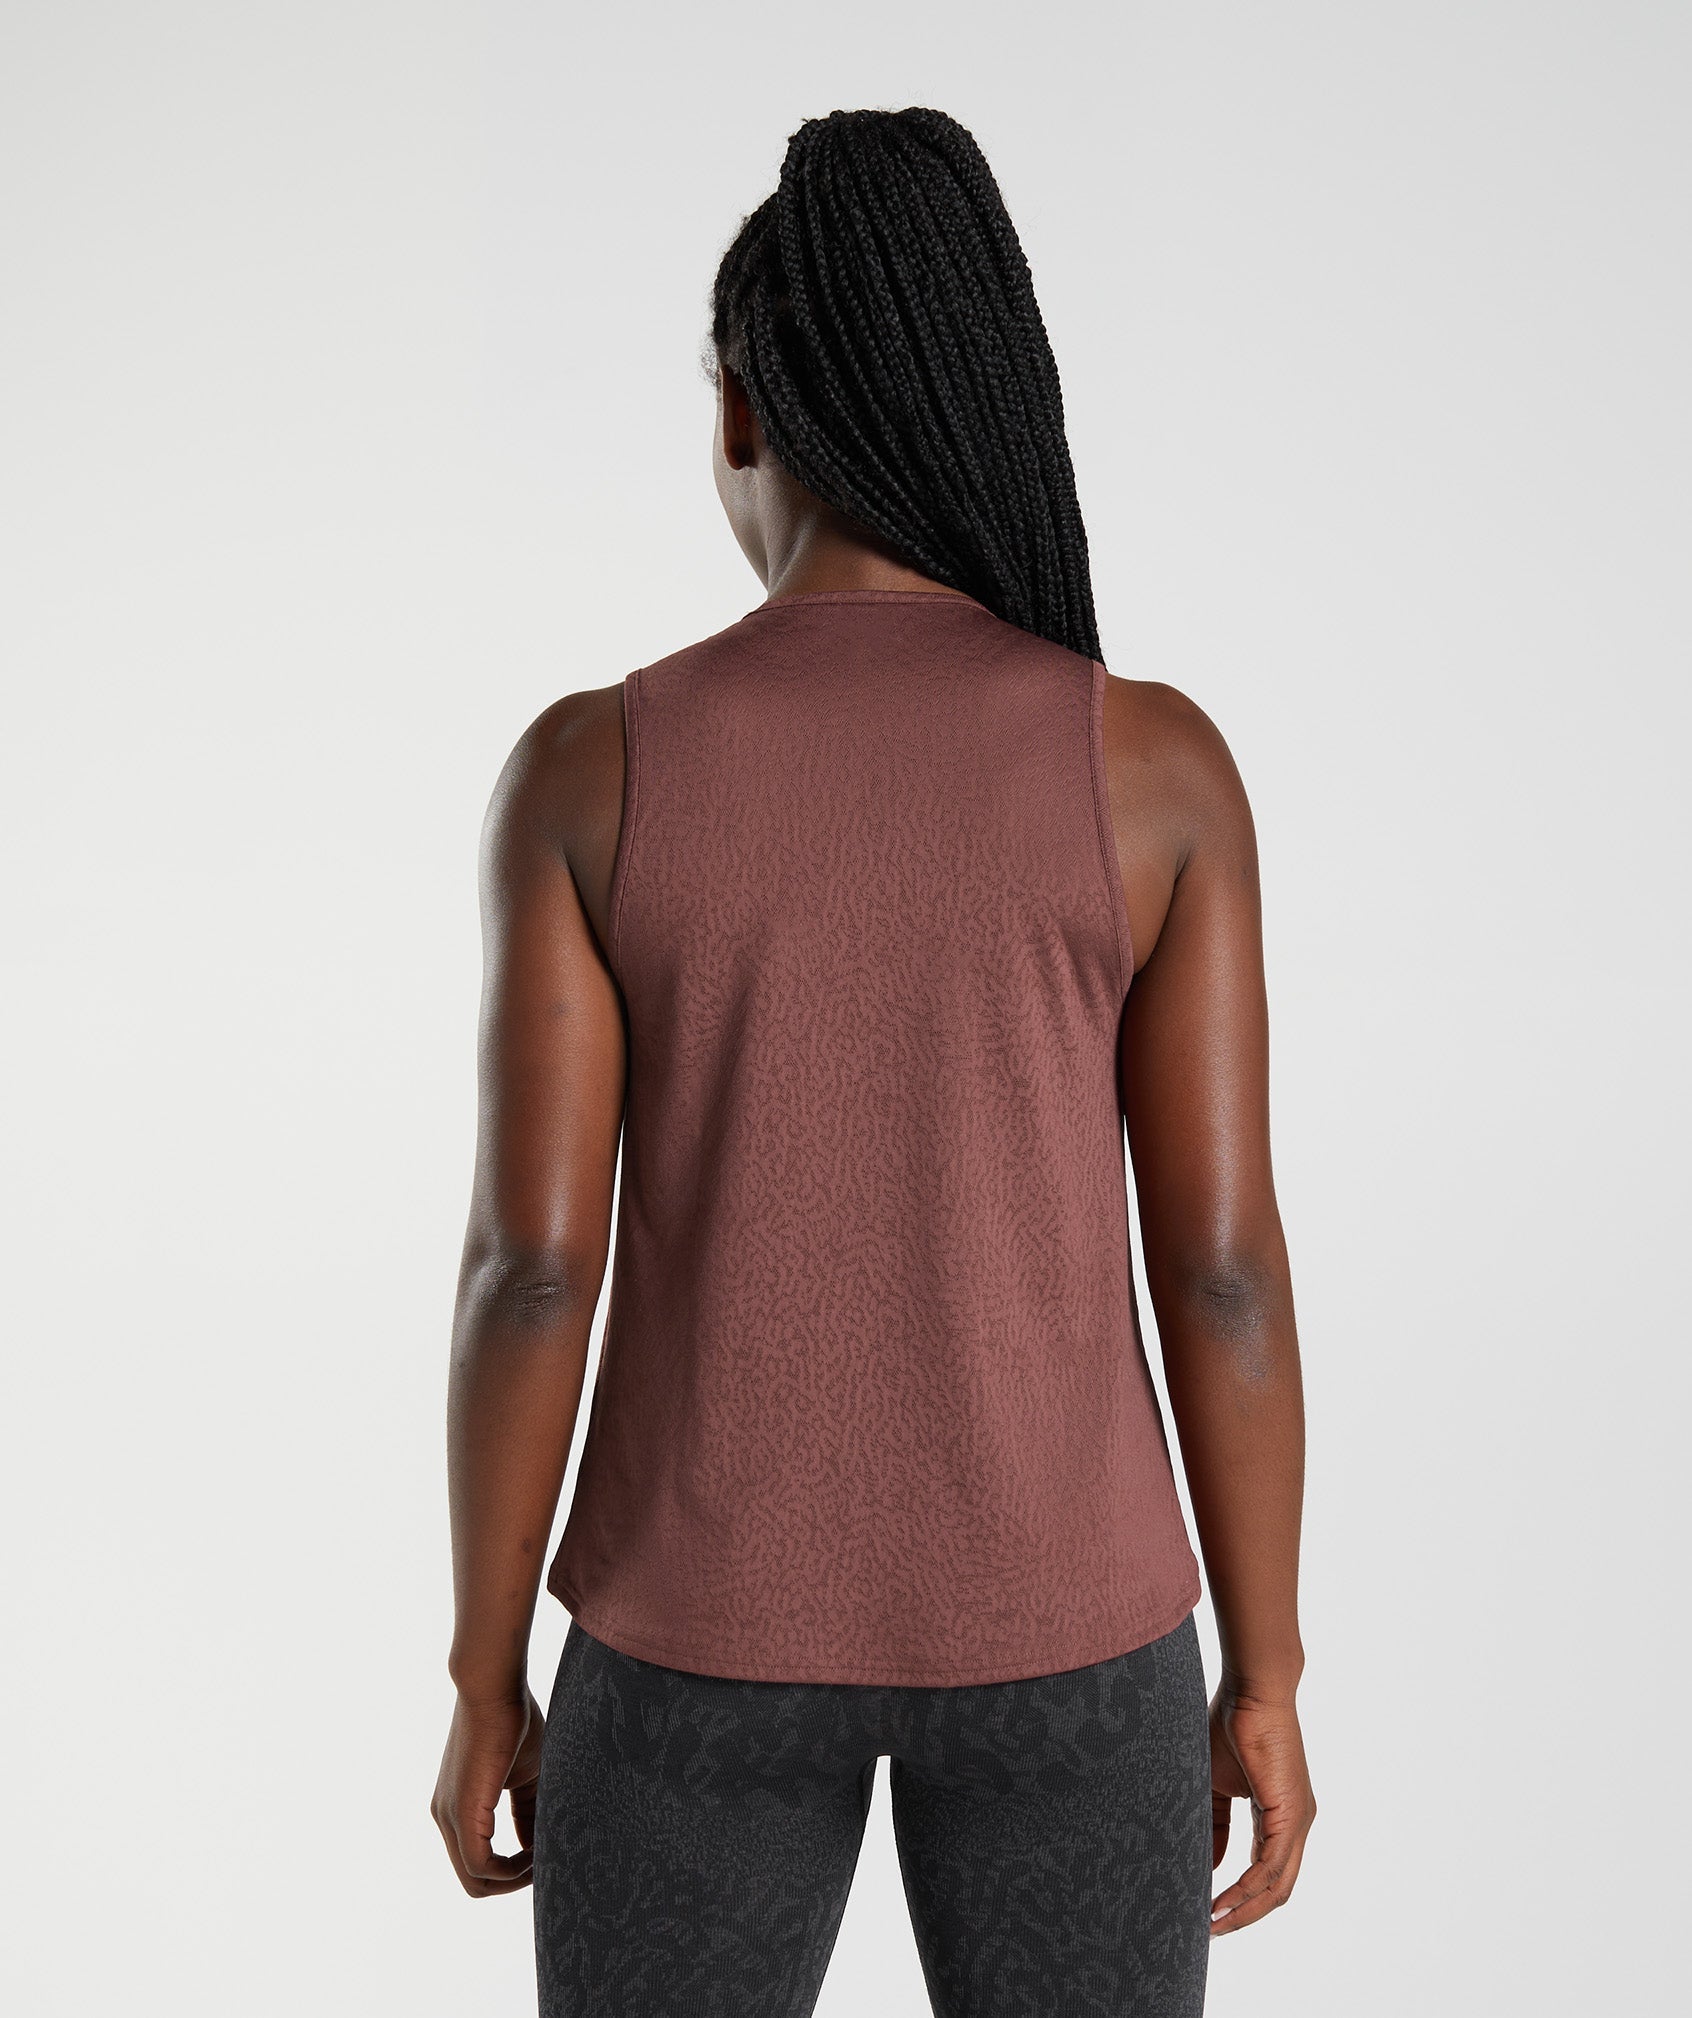 Adapt Animal Seamless Tank in Reef | Cherry Brown - view 2